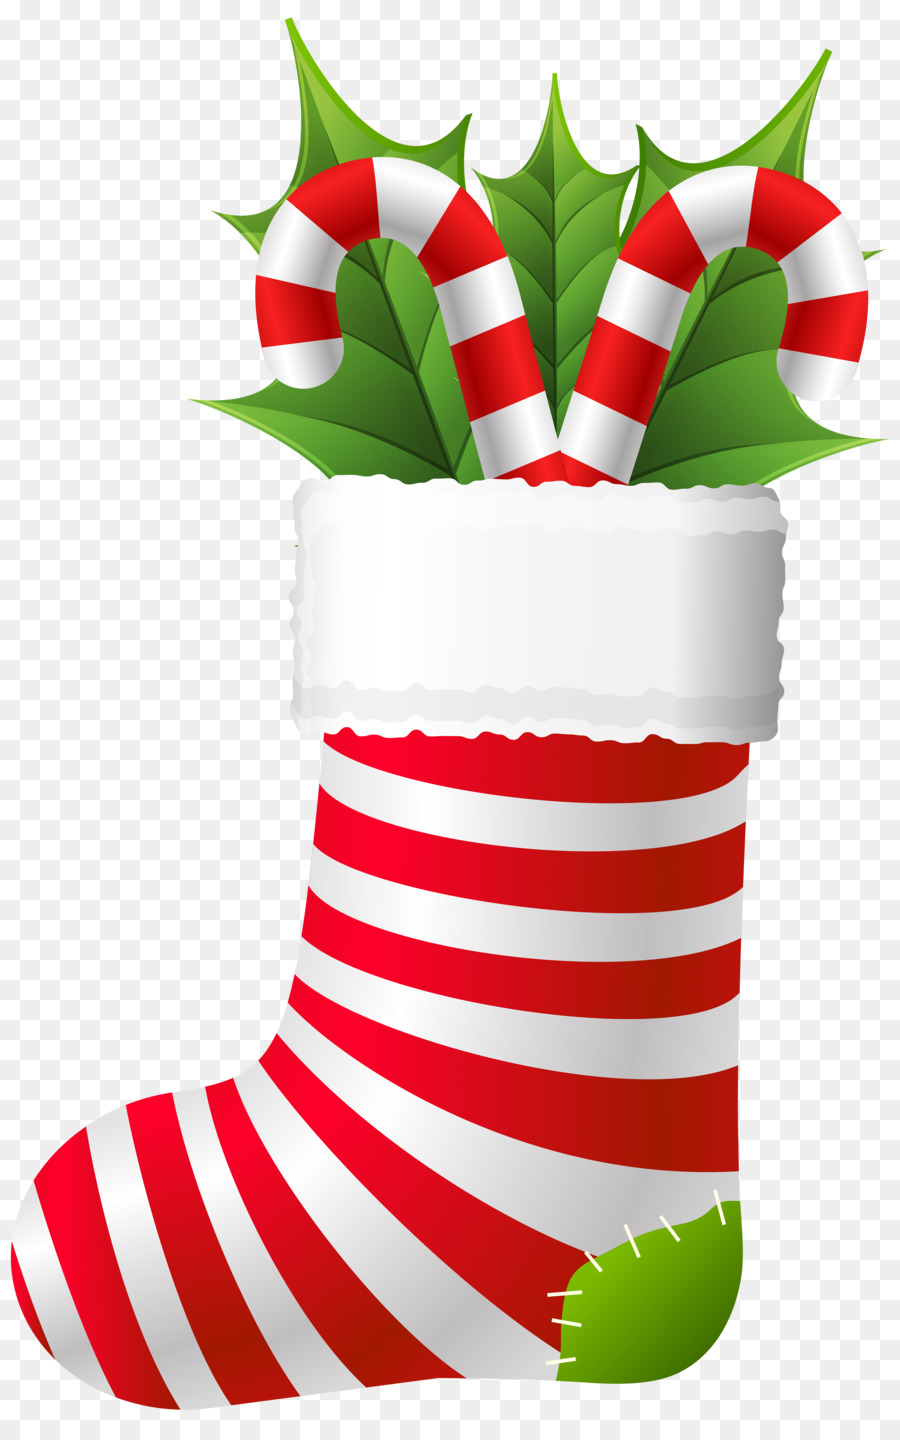 Christmas Stockings Christmas ornament Candy cane Clip art - christmas candy png download - 5046*8000 - Free Transparent Christmas  png Download.